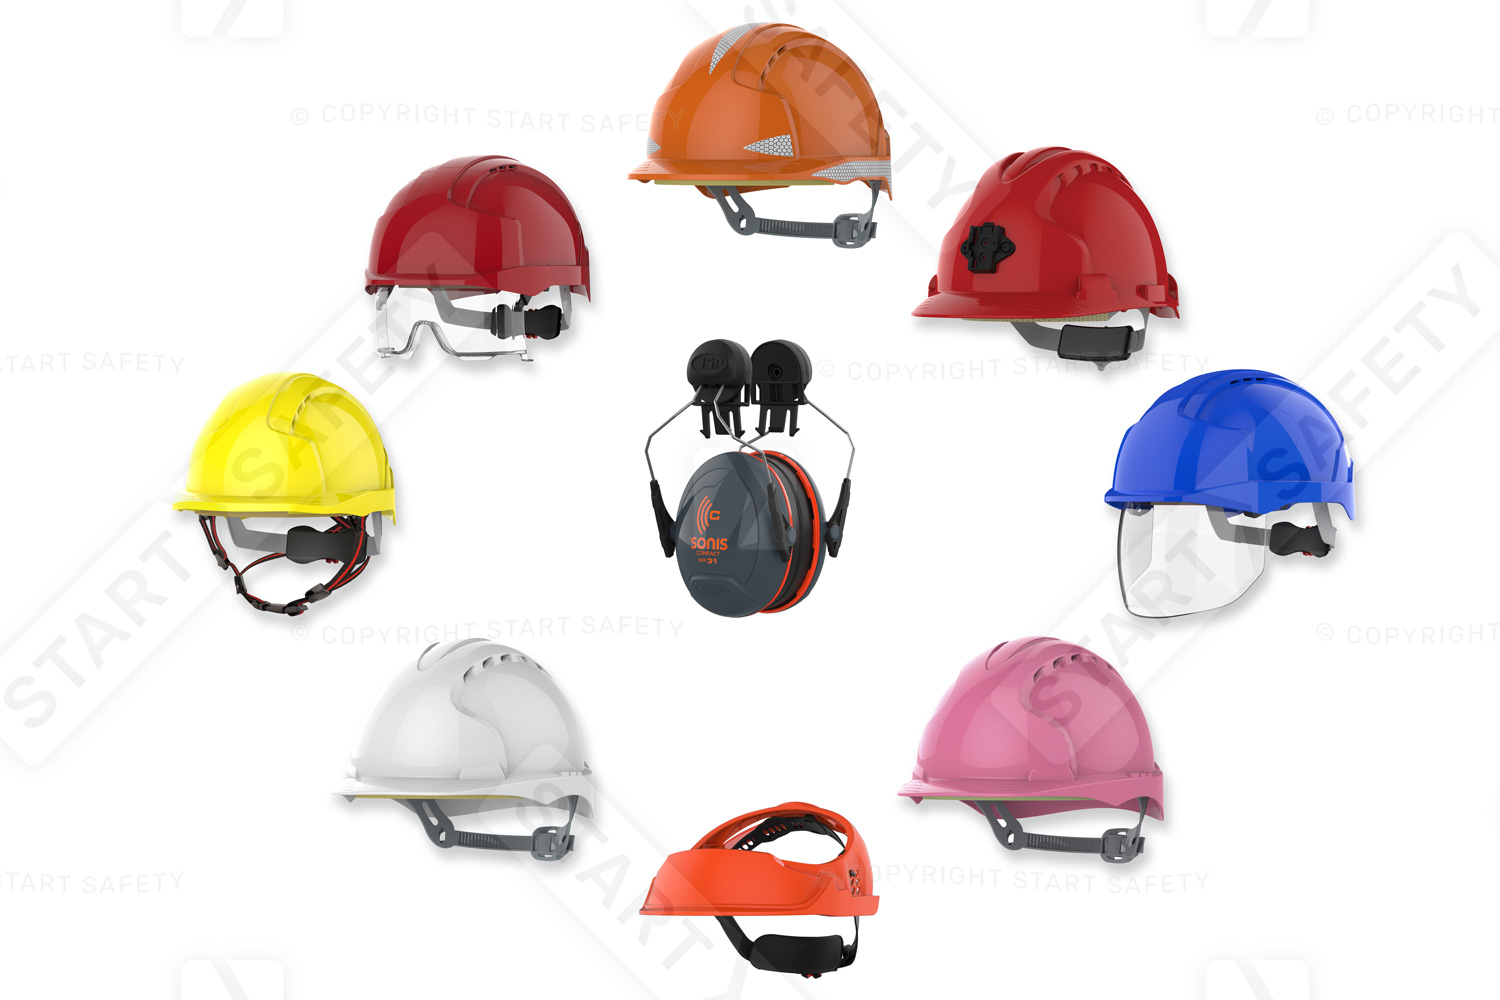 Different Helmets And Brow Guards Compatible With A Helmet Mounter Ear Defender